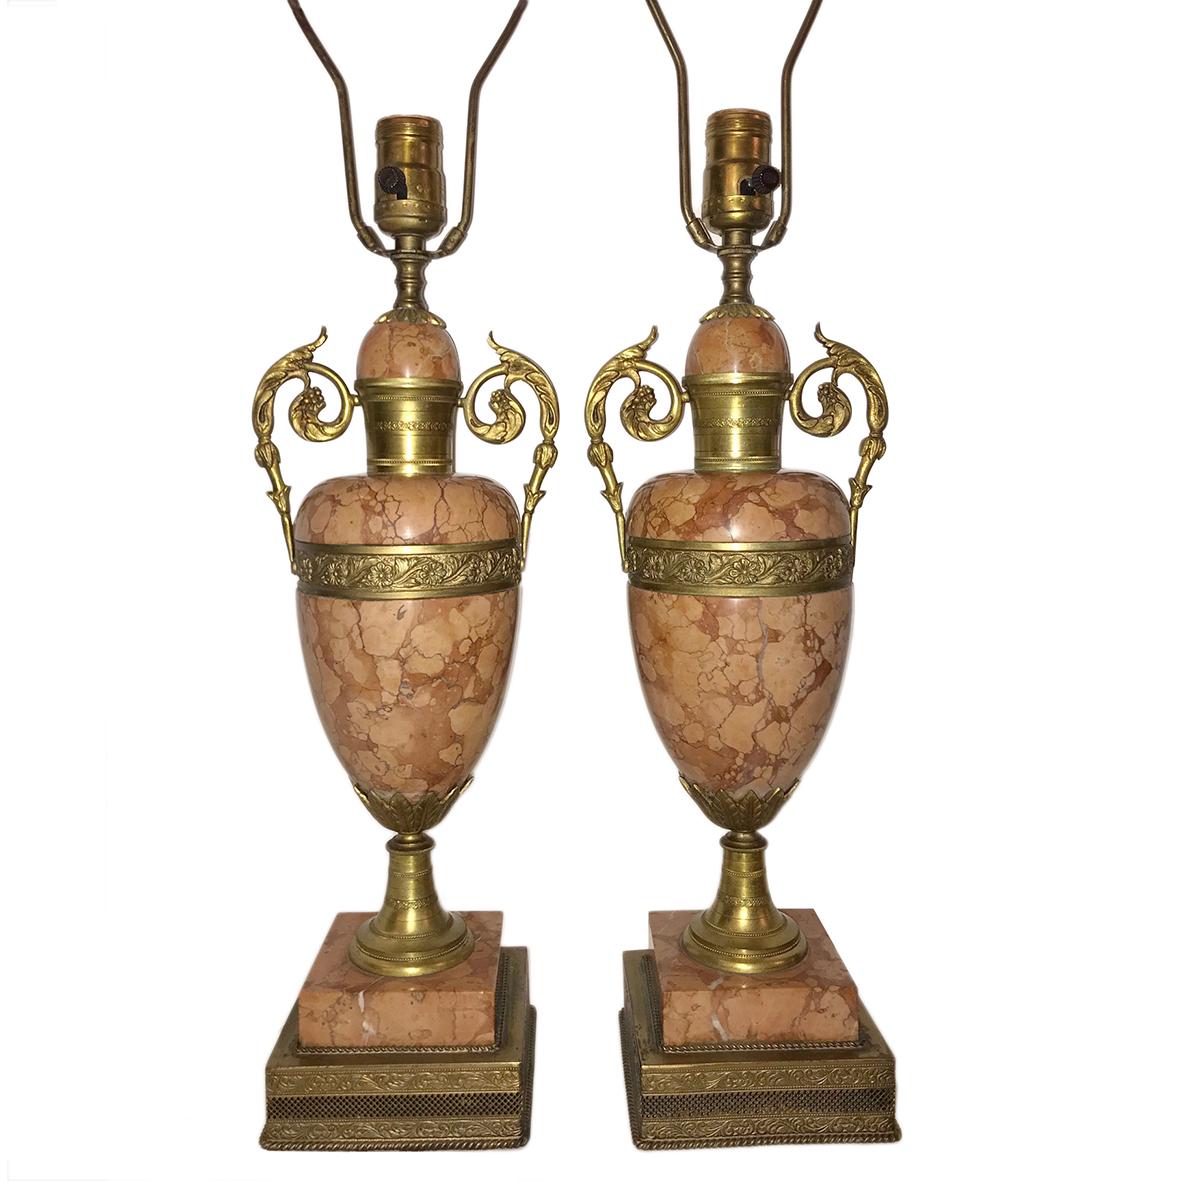 Pair of 1910s French neoclassic style marble and bronze table lamps.

Measurements:
Height of body 16